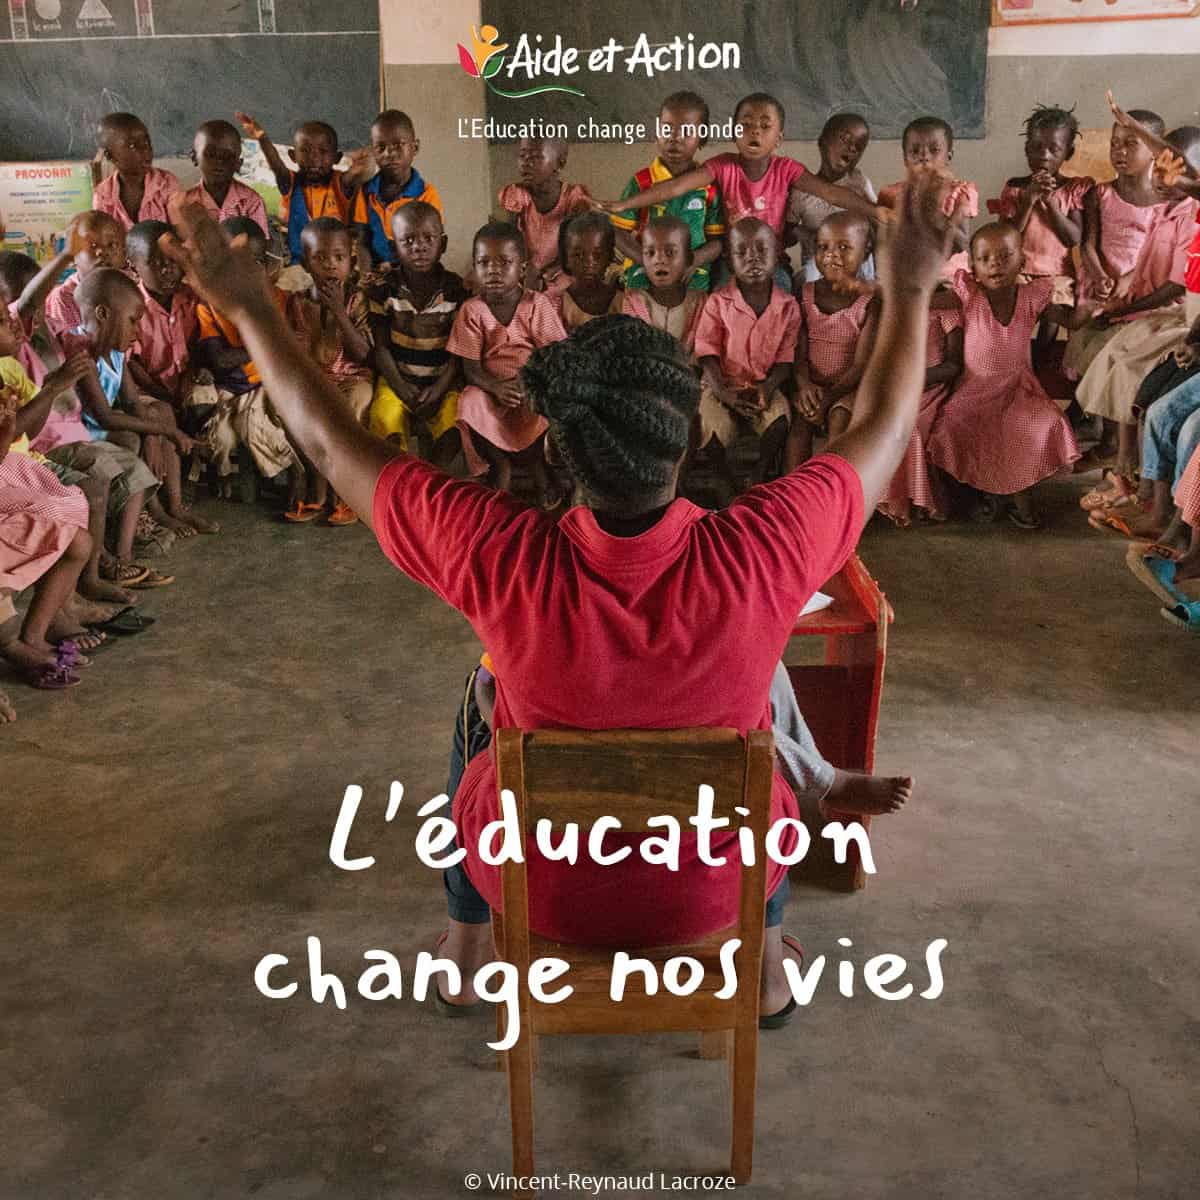 Aide et Action raises awareness on education as a factor of change and human development